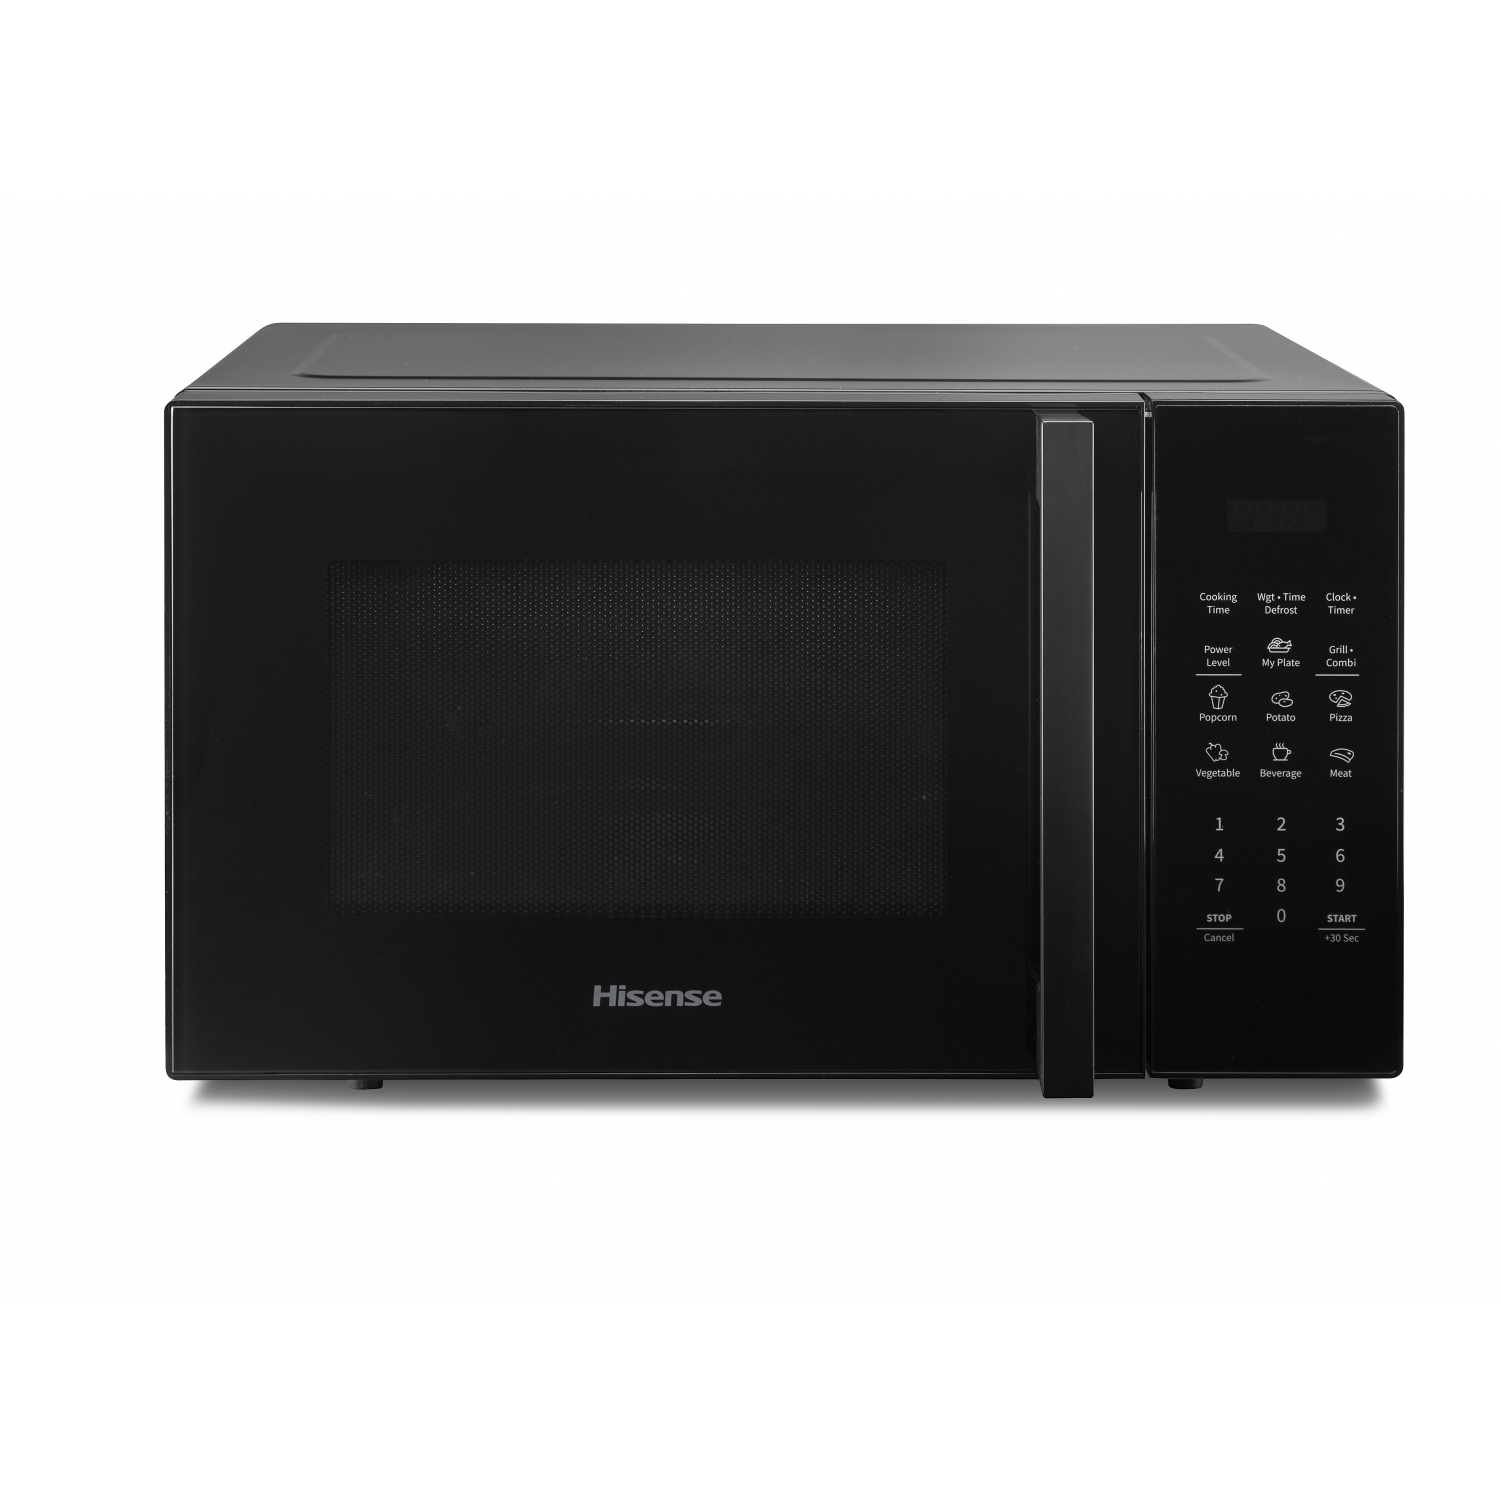 Hisense H28MOBS8HGUK 28 Litre Microwave with Grill - Black - 0